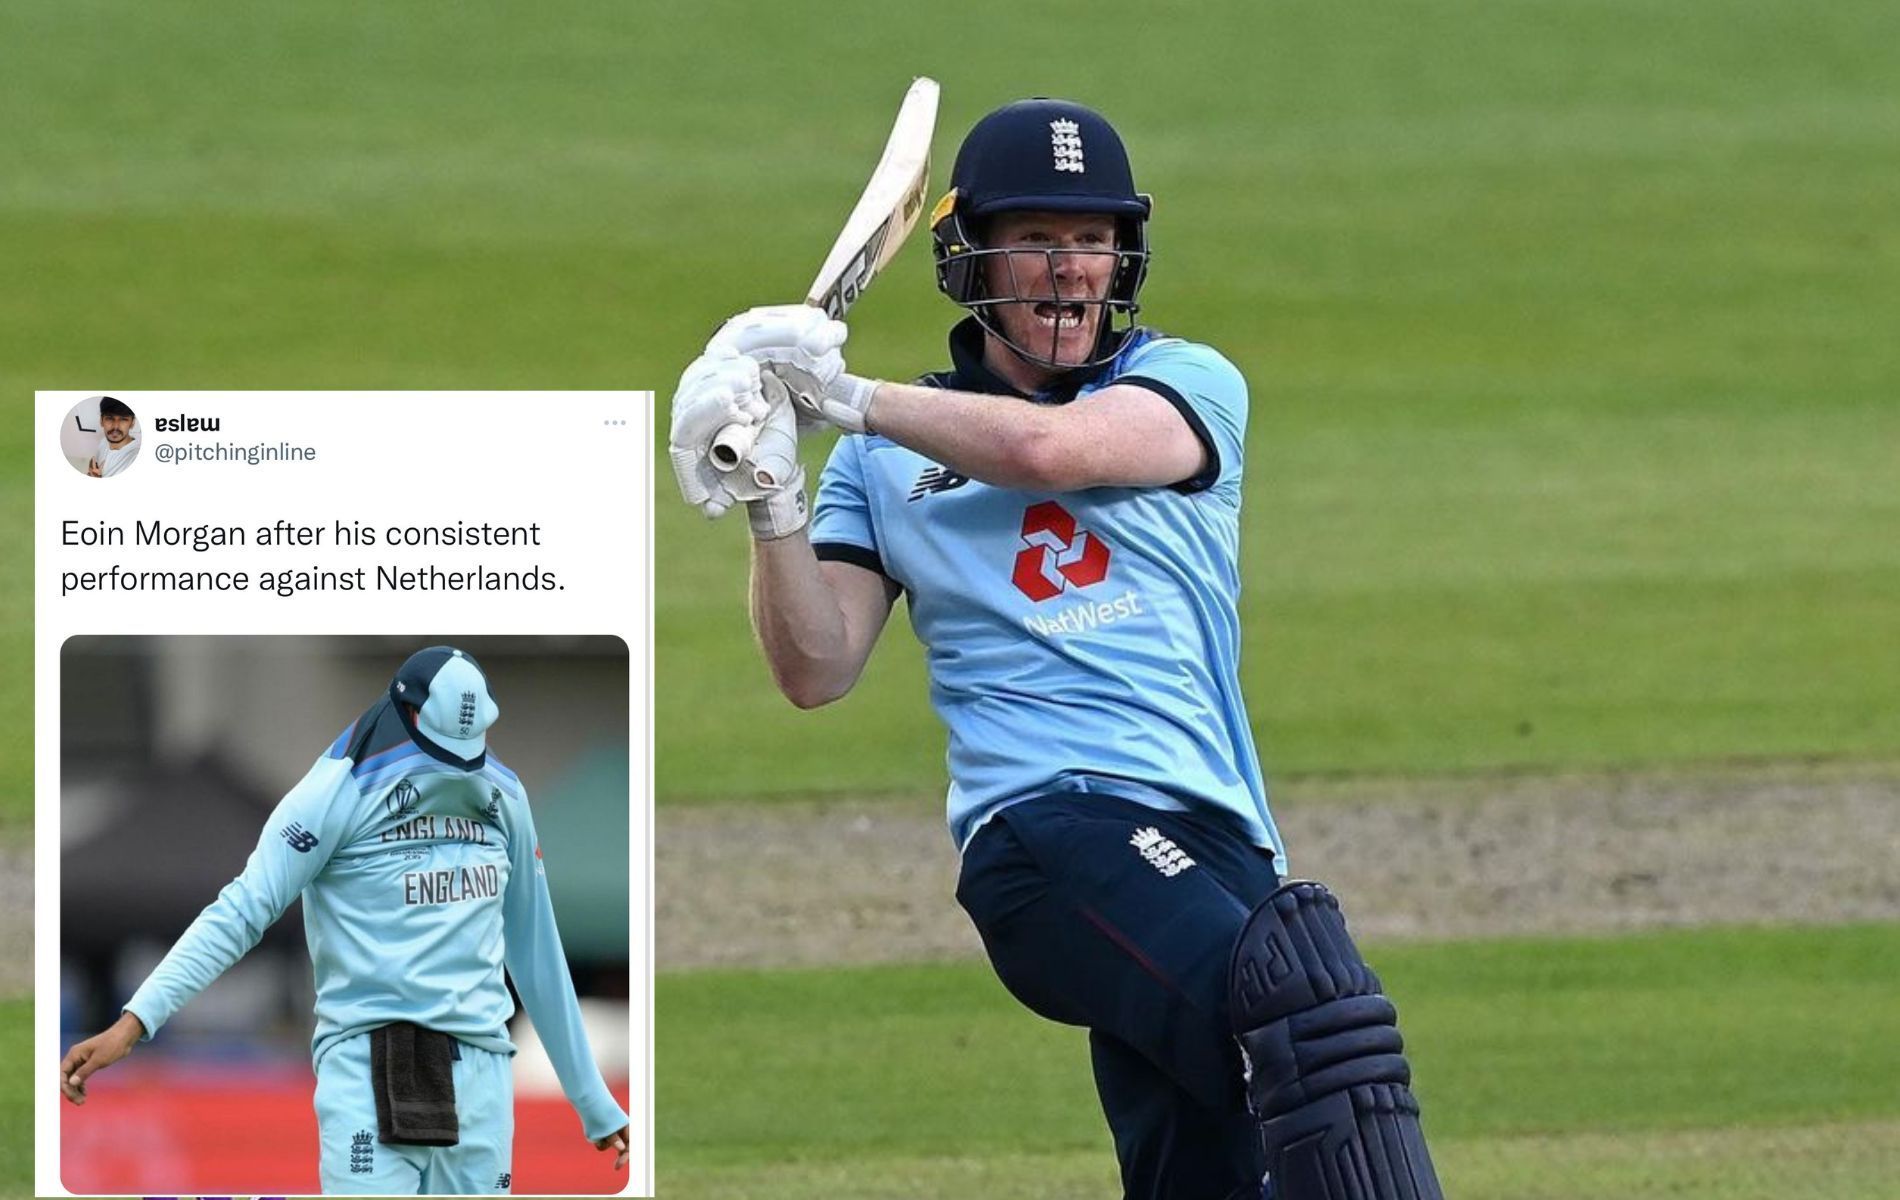 Eoin Morgan was dismissed for a seven-ball duck on Sunday (Pic: Twitter)